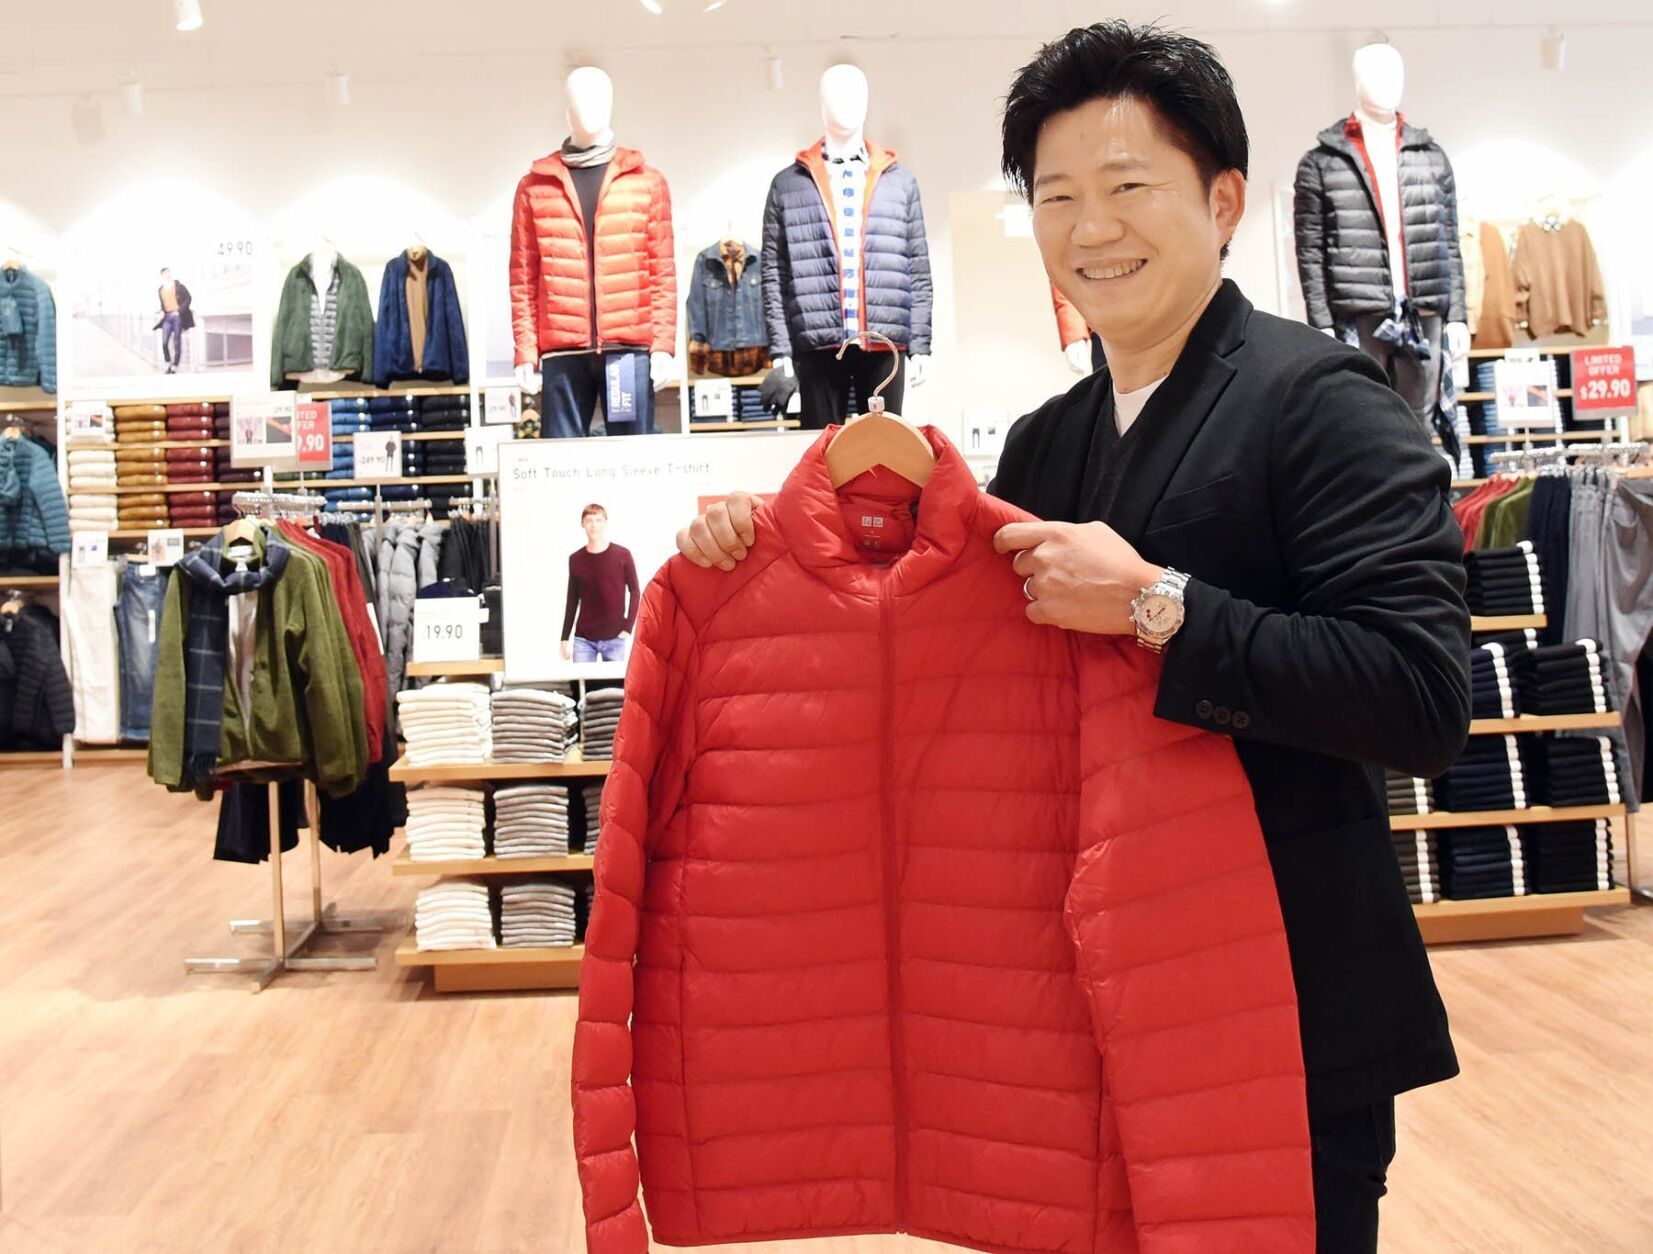 Why UNIQLO matters more than Unique Clothing Warehouse